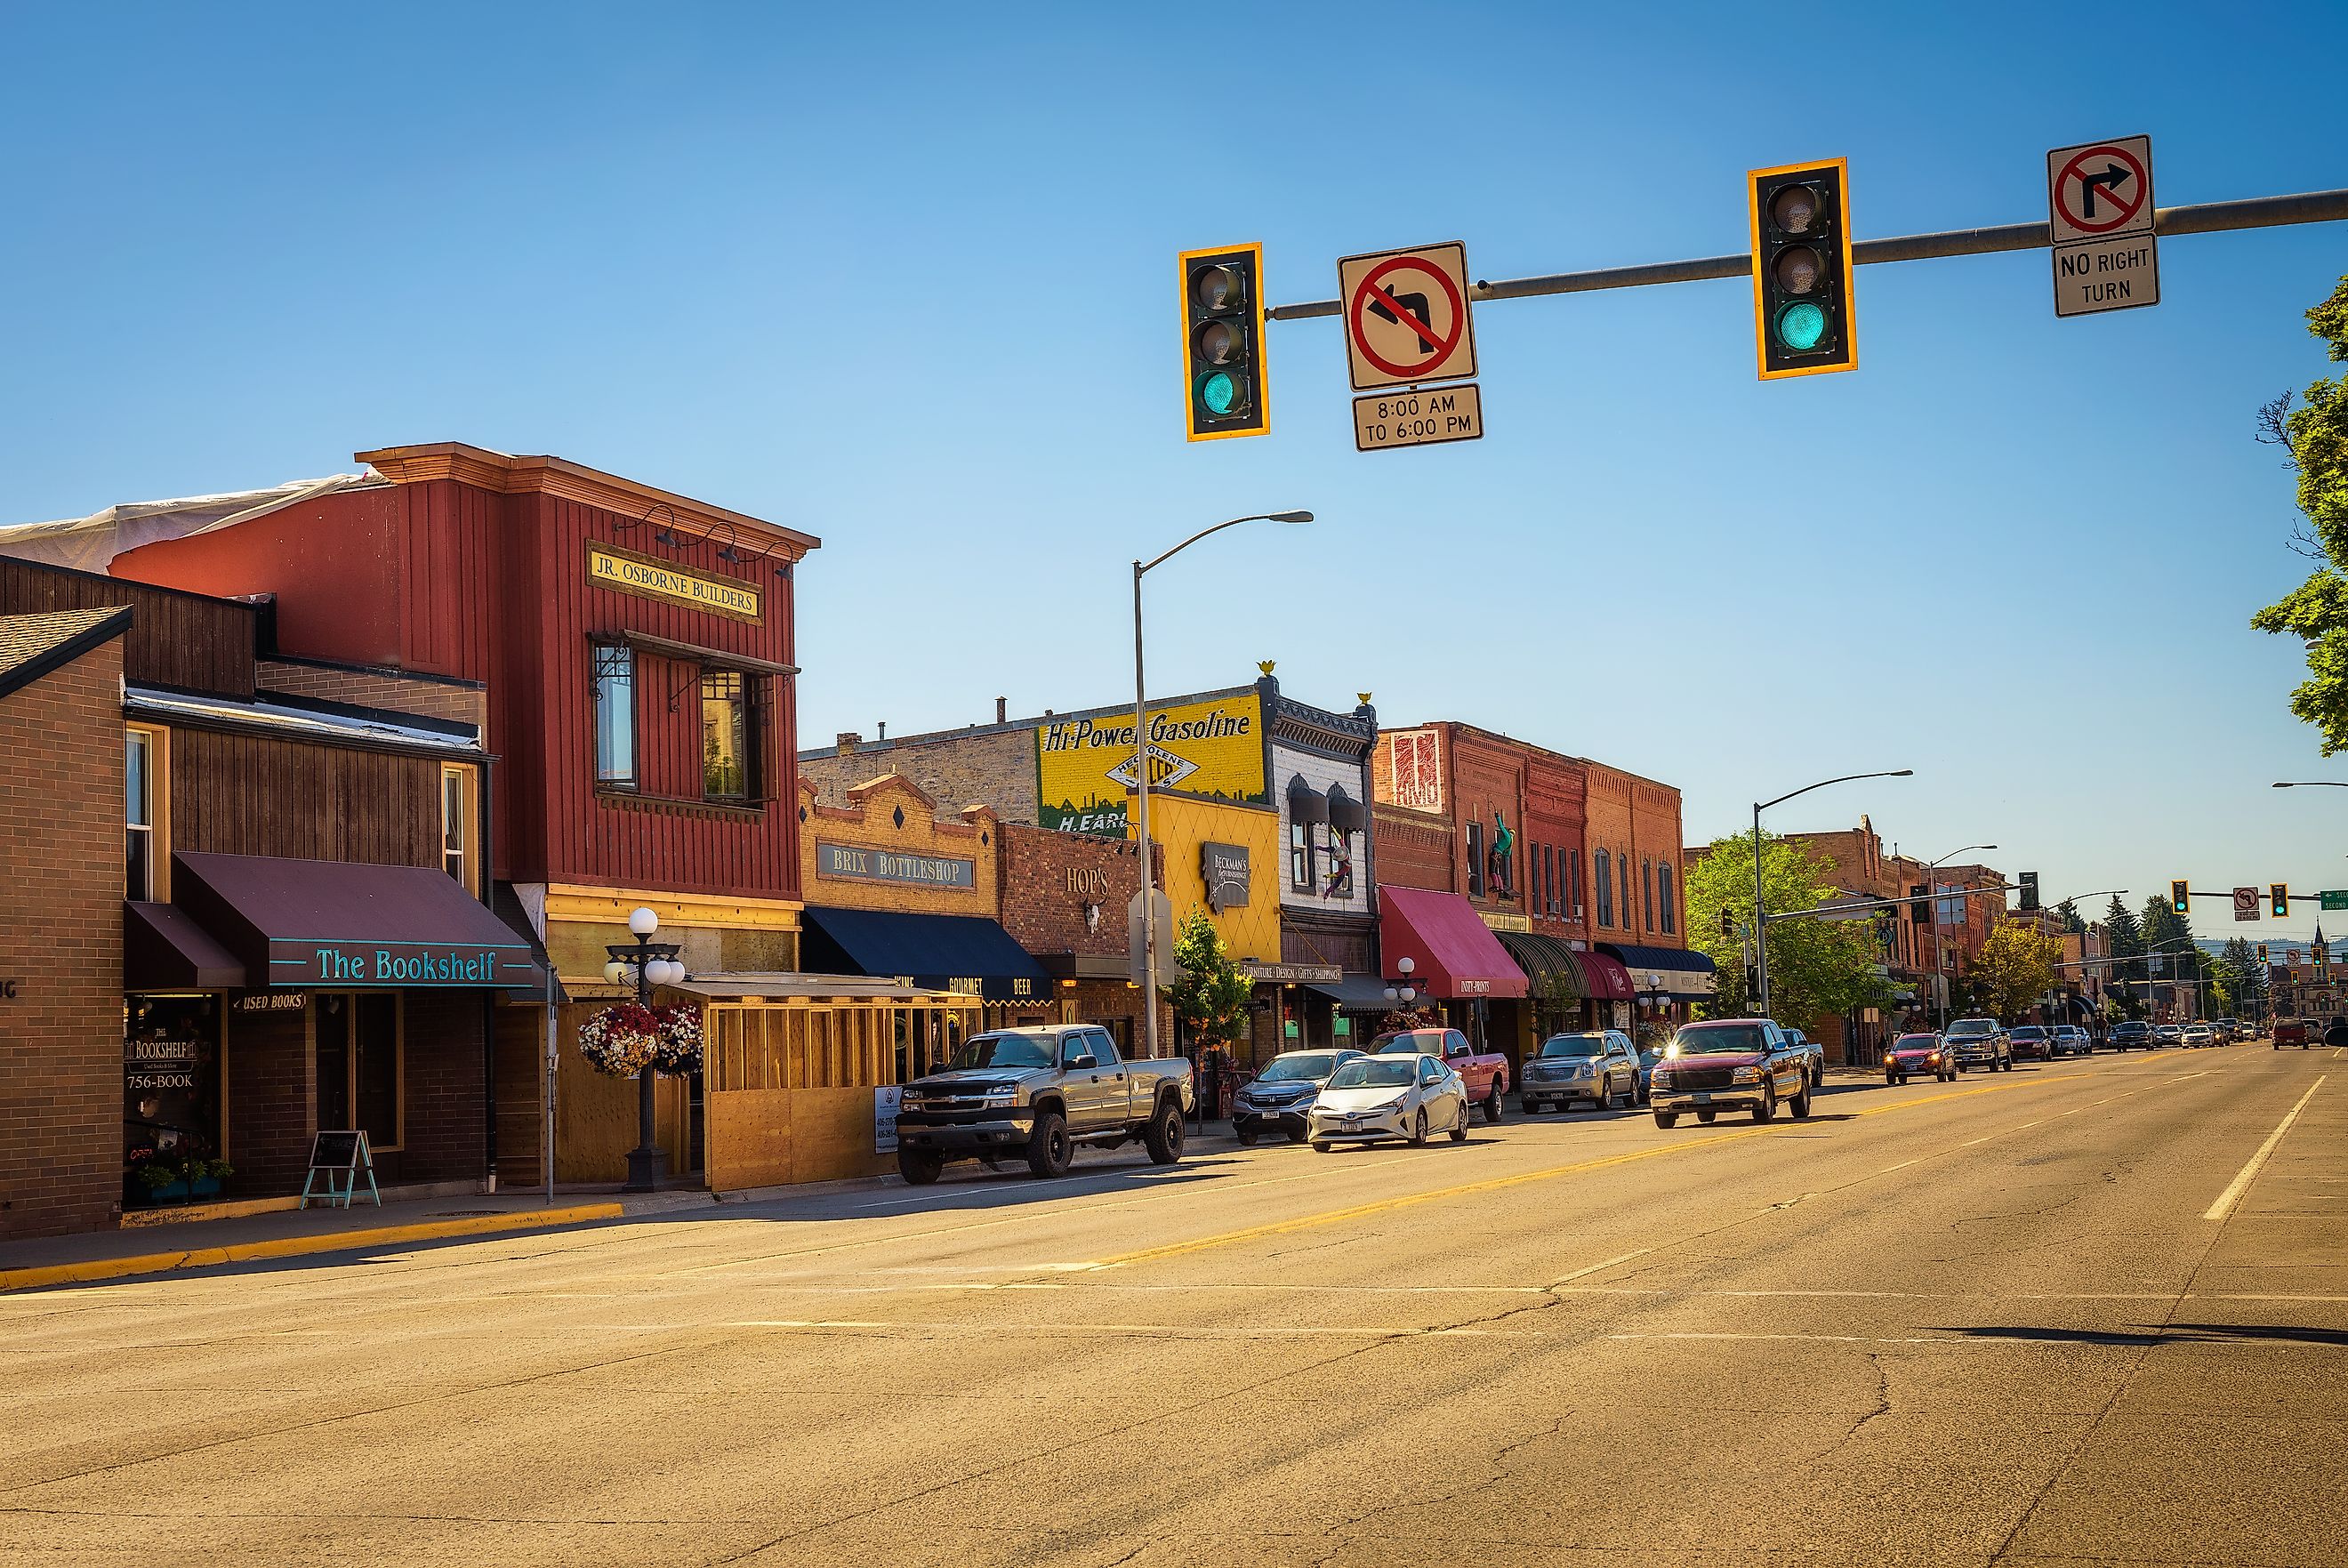 Kalispell, Montana, US: Scenic street view with shops and restaurants. Kalispell is the gateway to Glacier National Park. Editorial credit: Nick Fox / Shutterstock.com